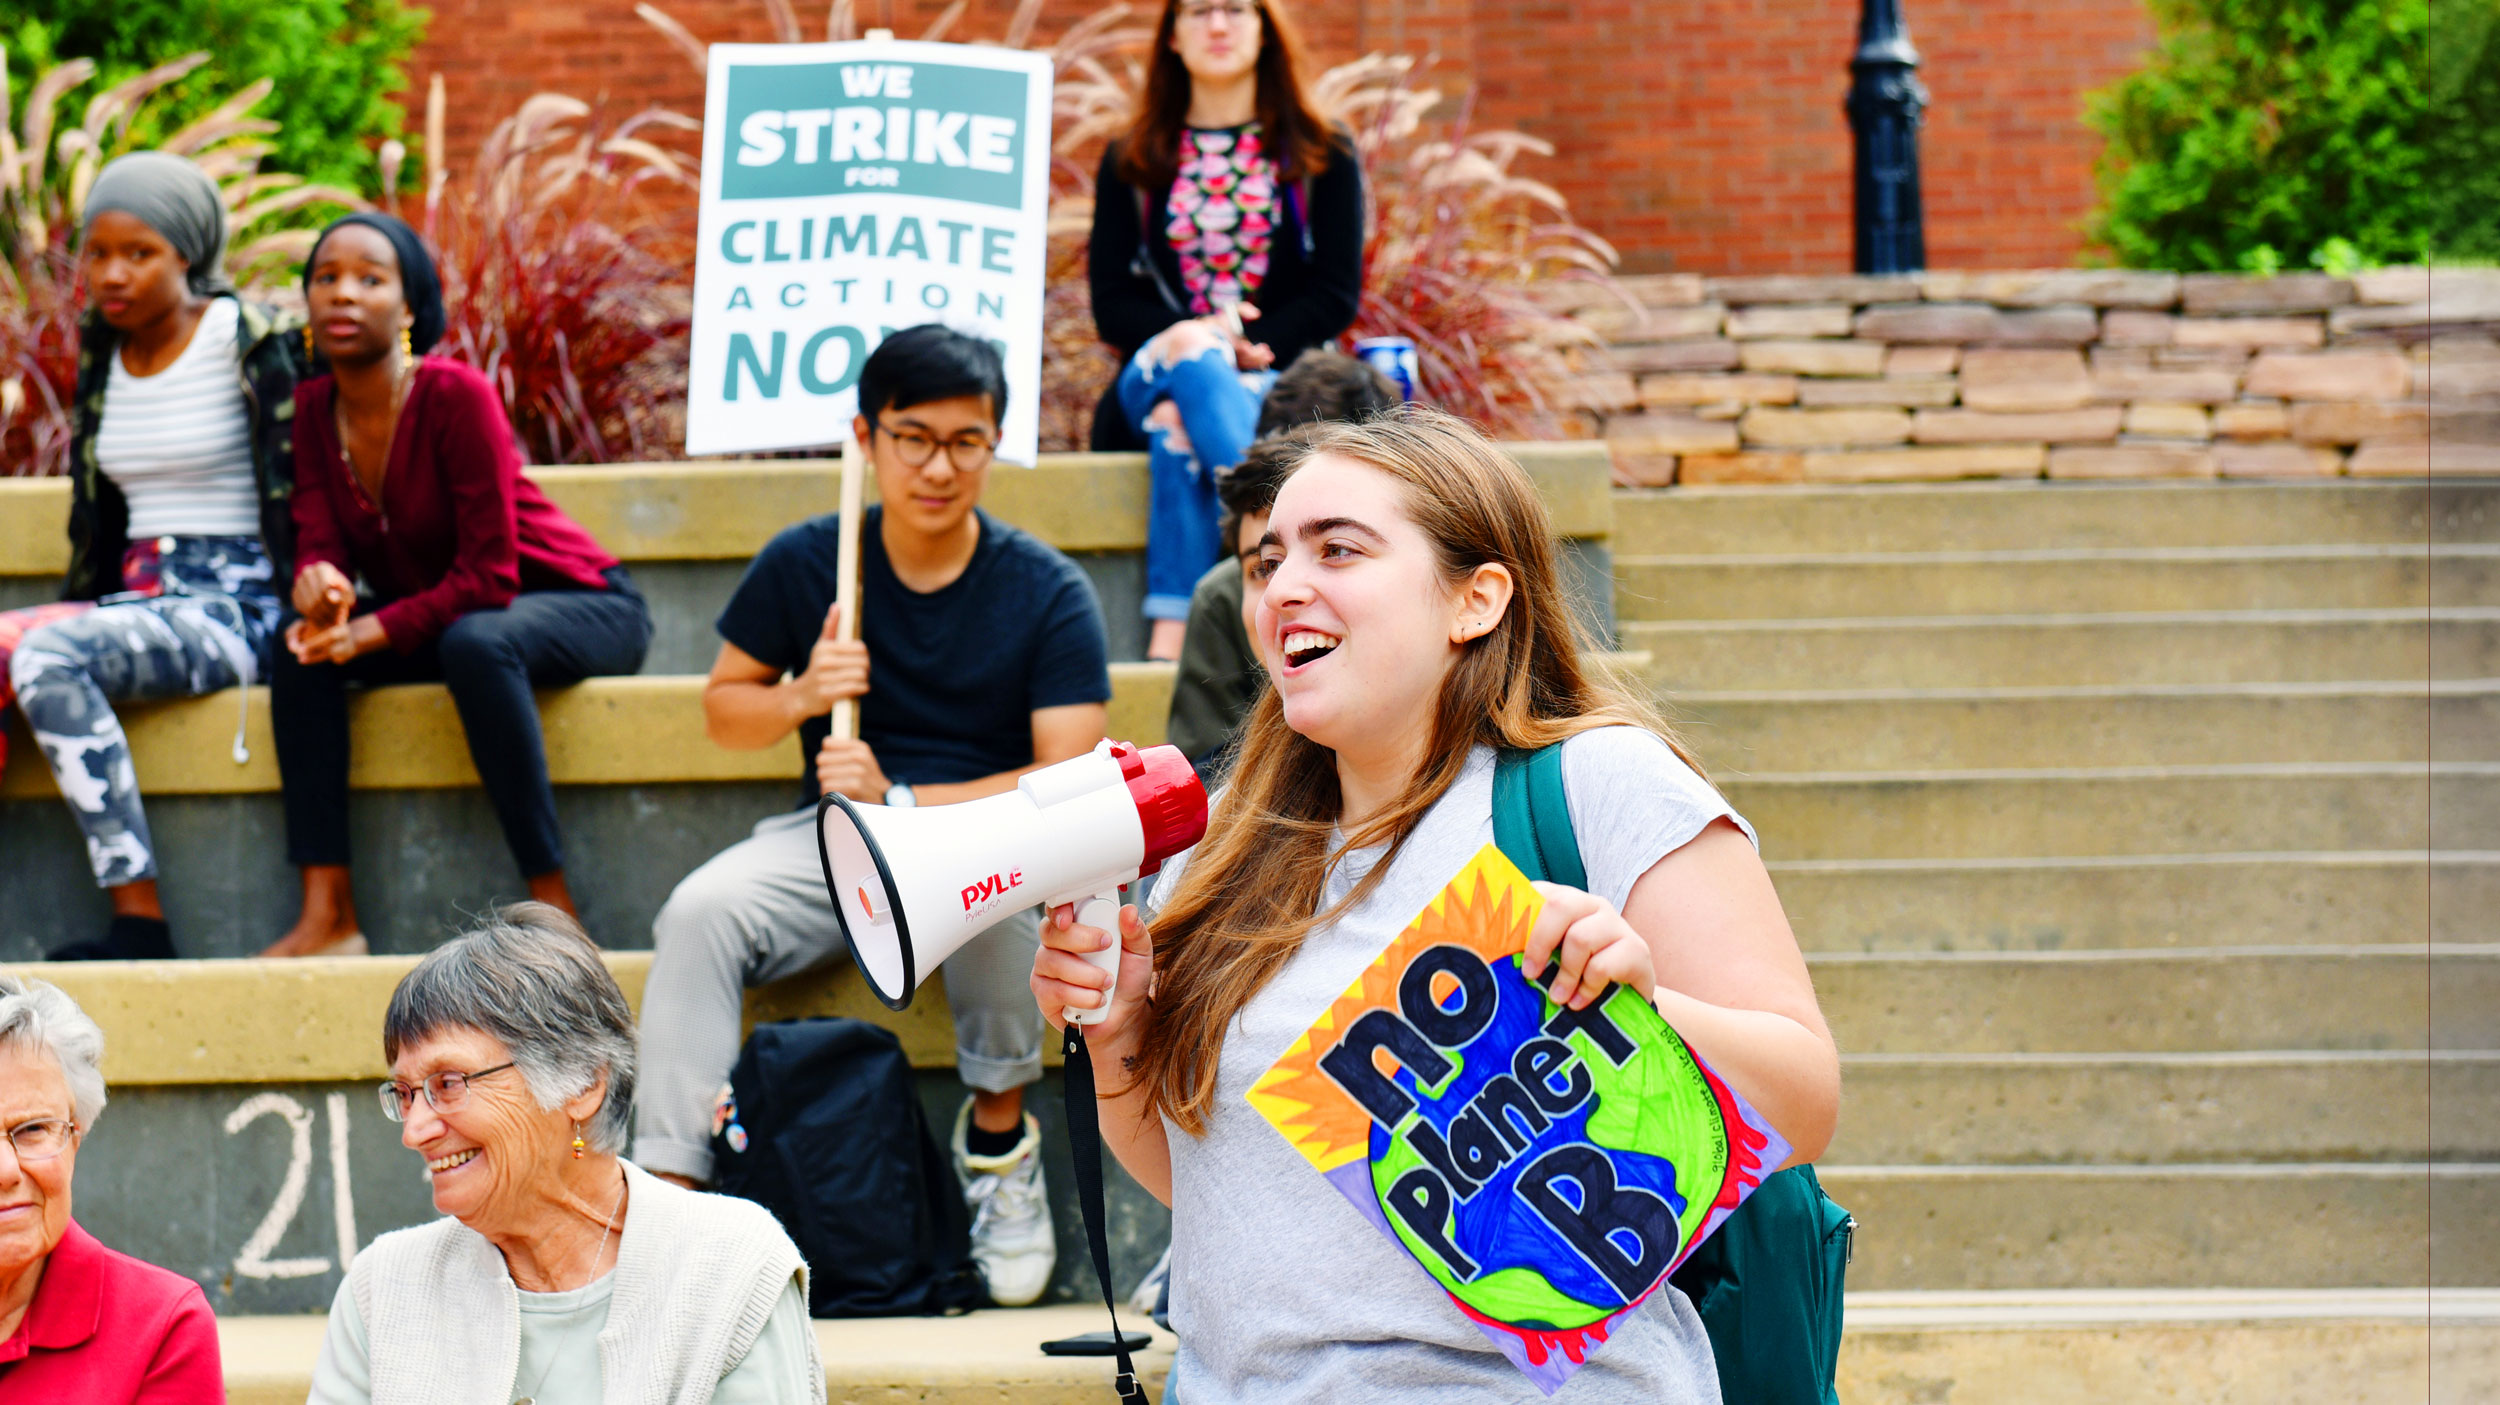 A student speaks into a megaphone at a climate rally and holds a sign that reads "No Planet B"